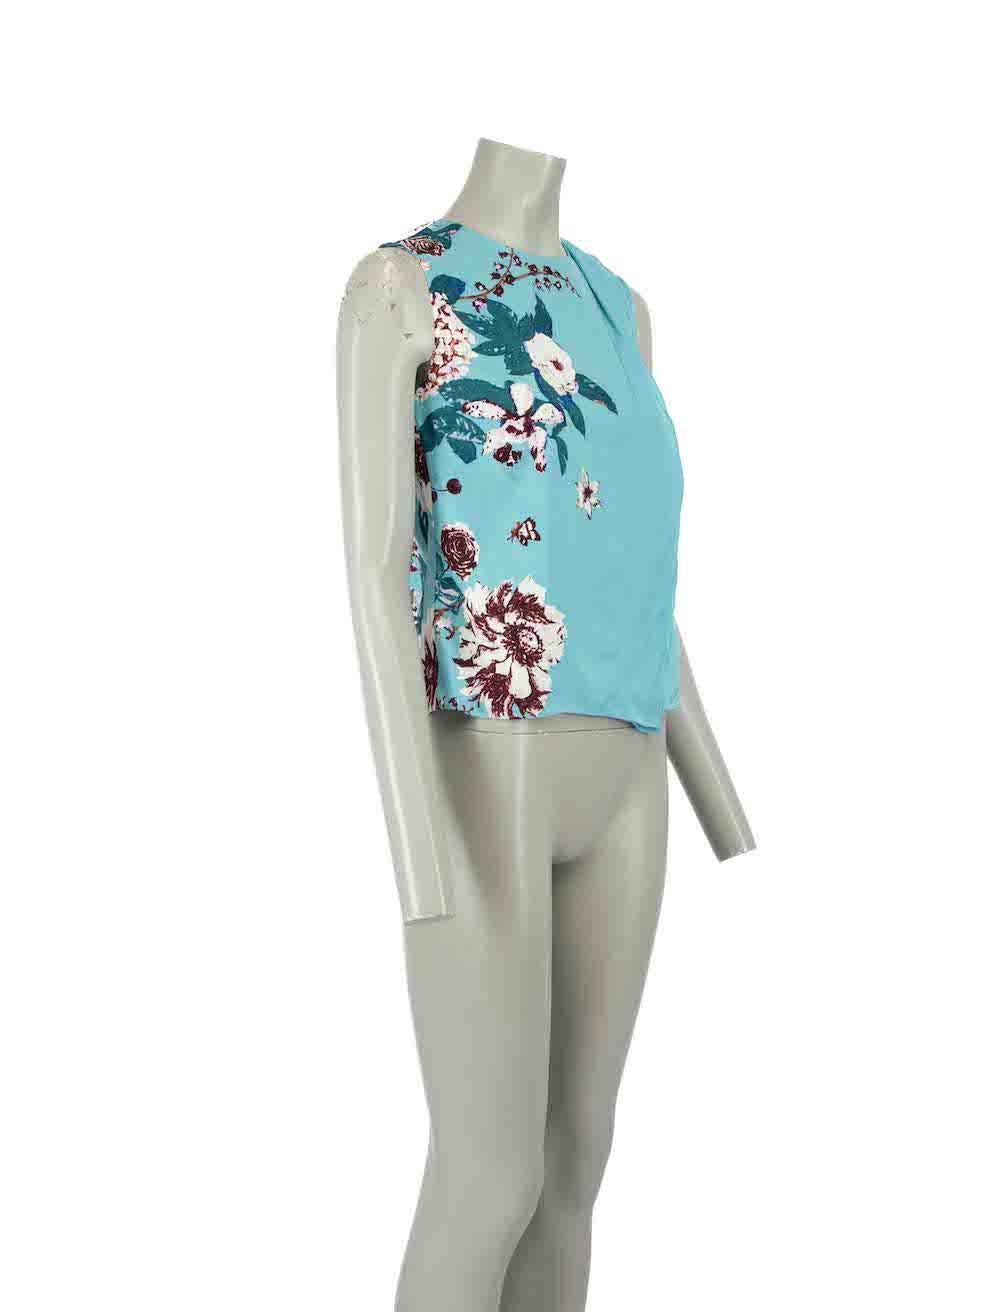 CONDITION is Never worn. No visible wear to top is evident on this new Diane Von Furstenberg designer resale item.
 
 Details
 Blue
 Viscose
 Tank top
 Floral print pattern
 Round neckline
 Layered panel accent
 Back zip closure with hook and eye
 
